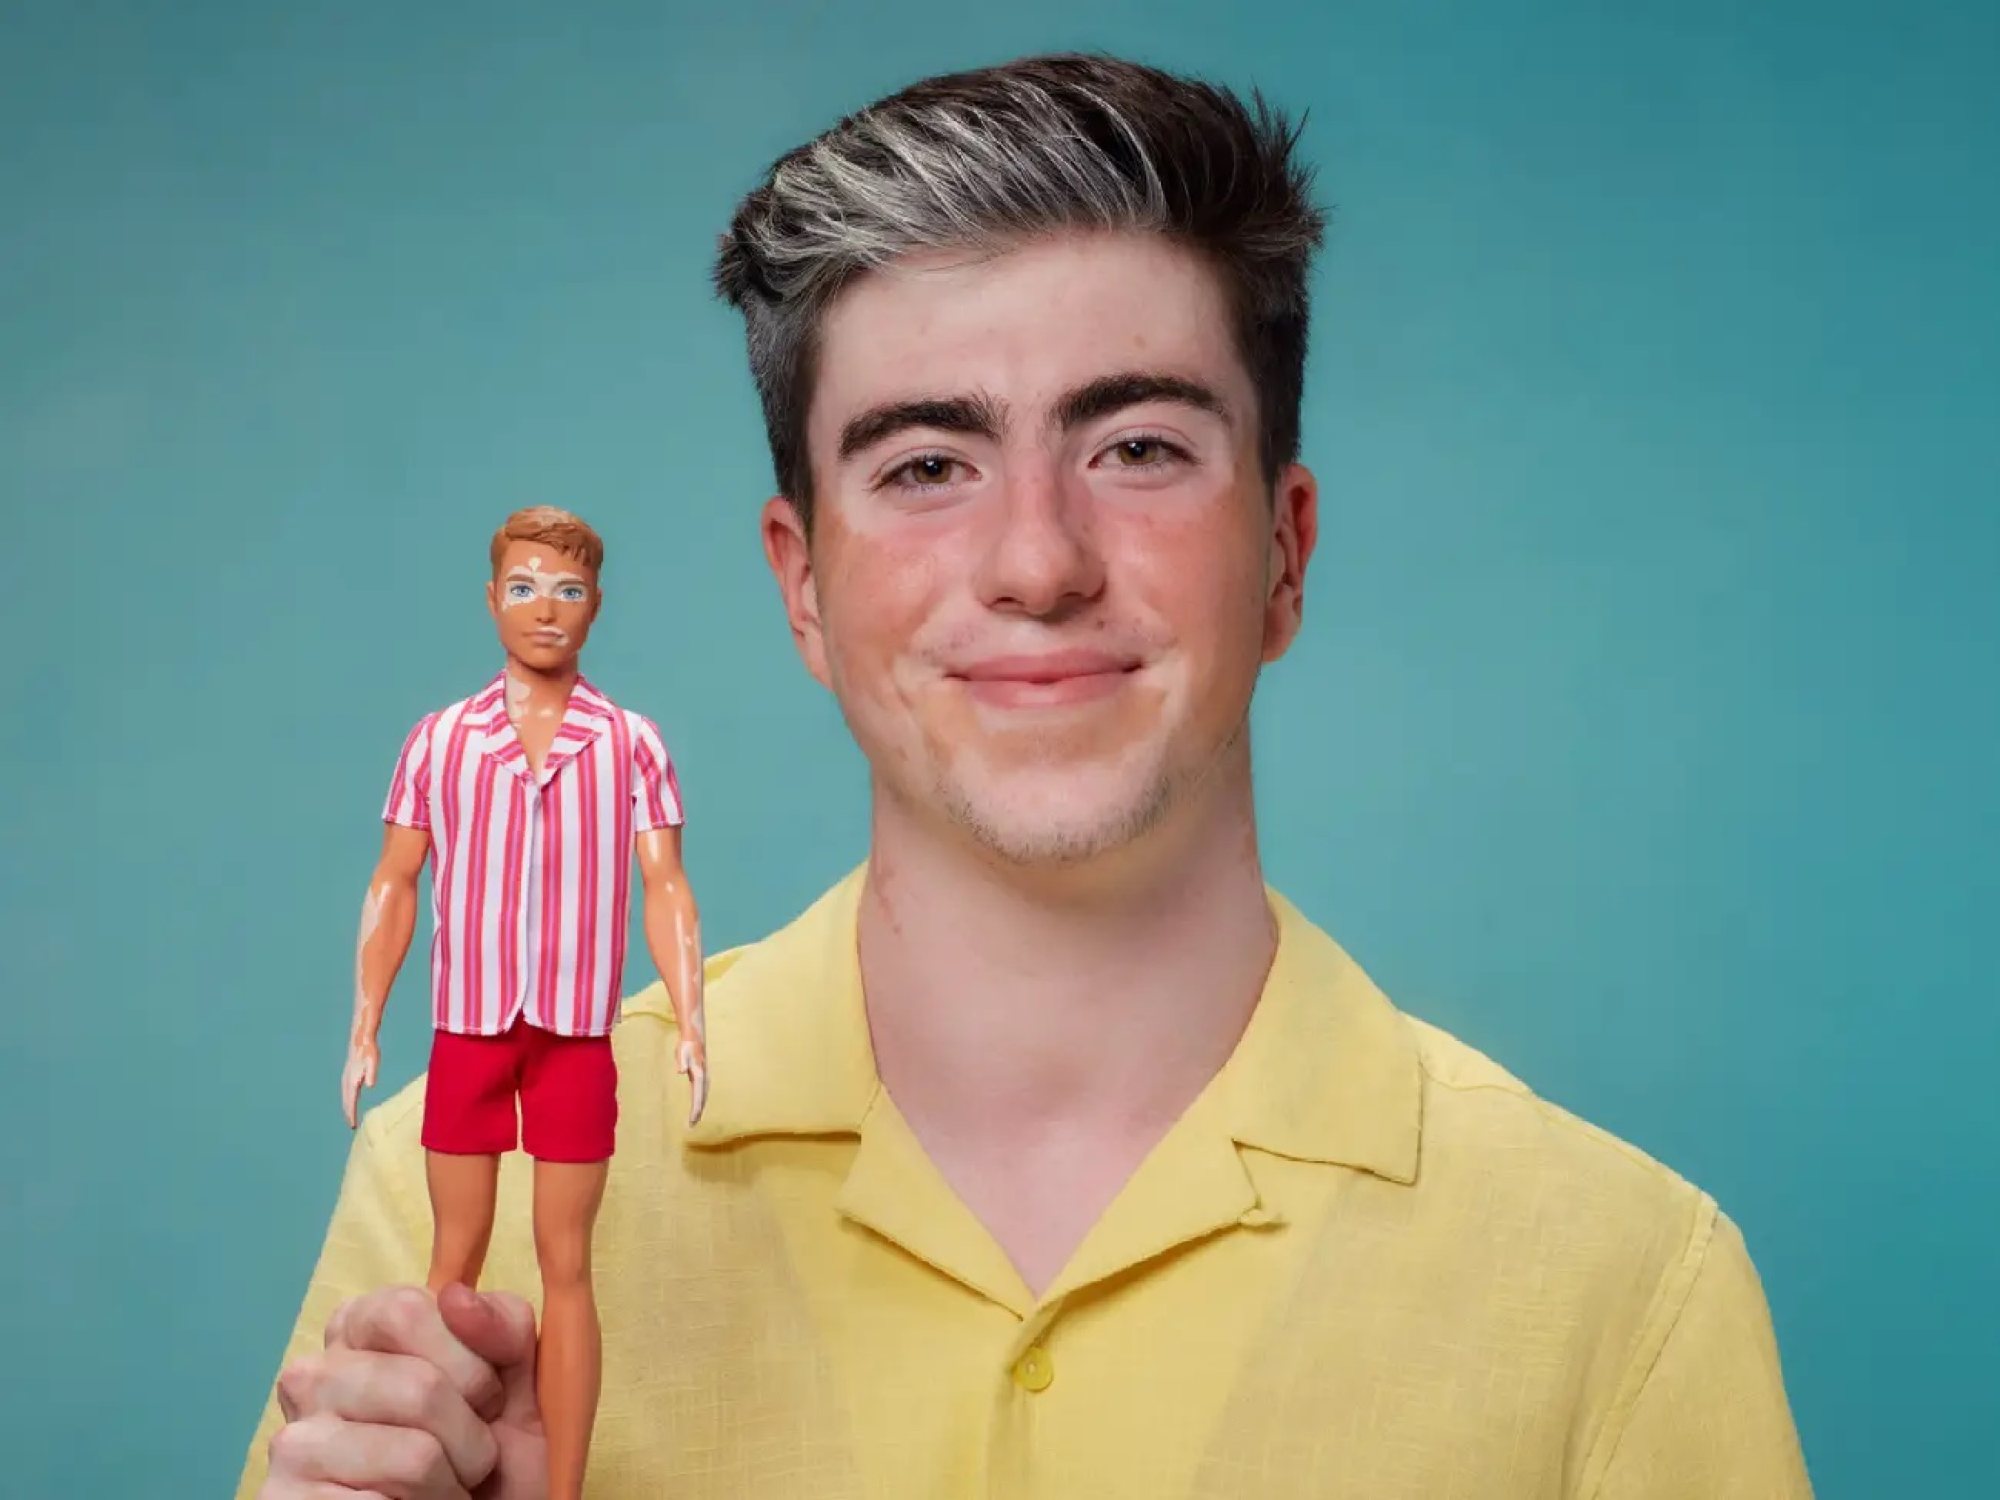 Barbie and Ken reflect body diversity with hearing aids, colourful